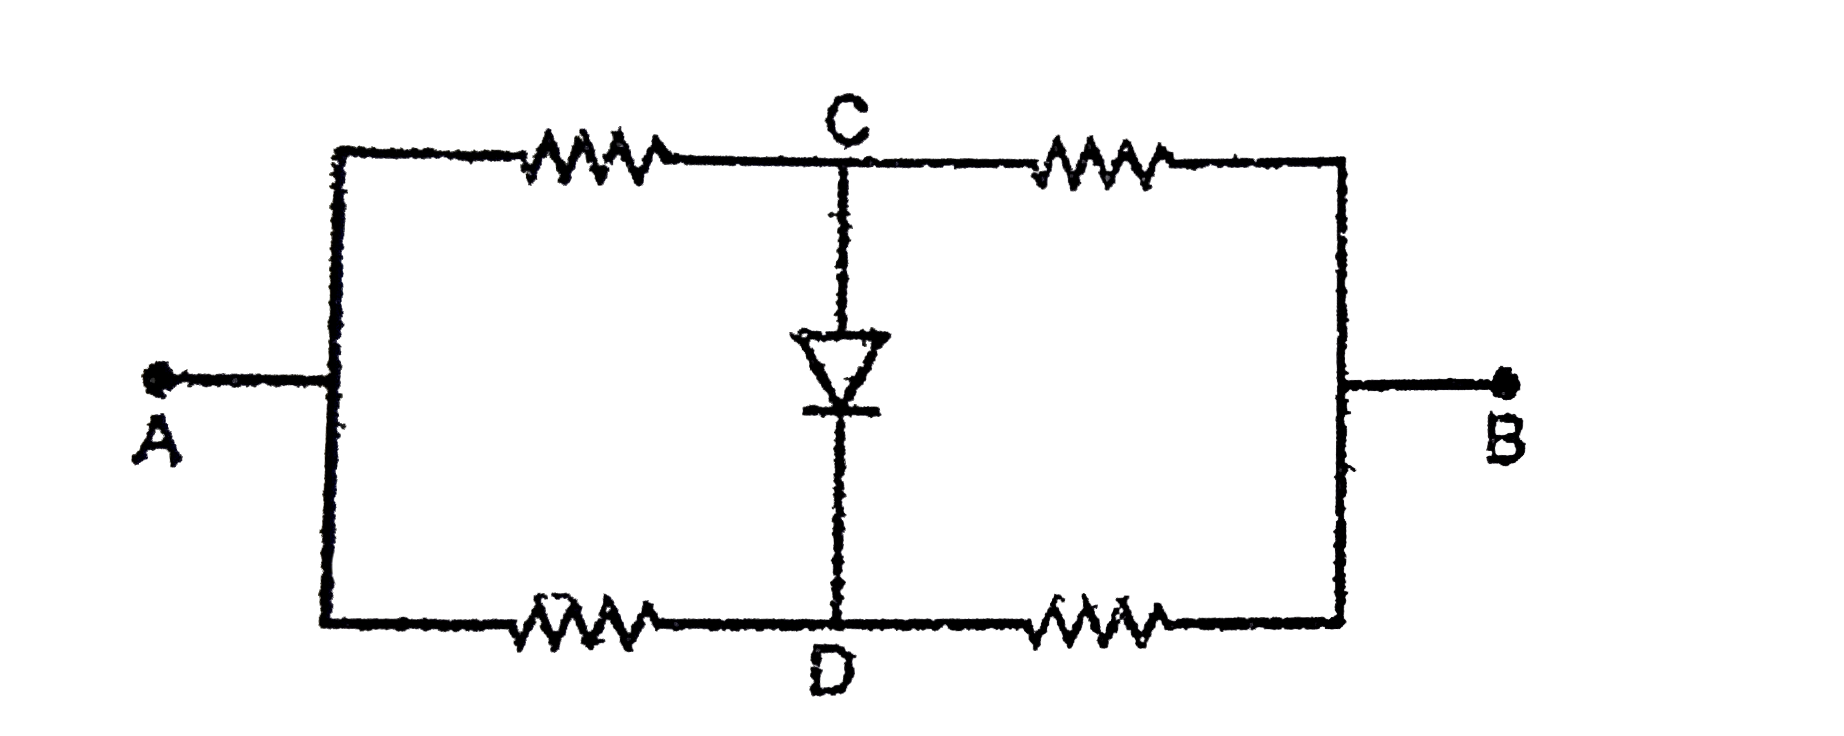 Four equal resistors, each of resistance 10 ohm are connected as shown in the adjoining circuit diagram. Then the equivalent resistance between points A and B is-